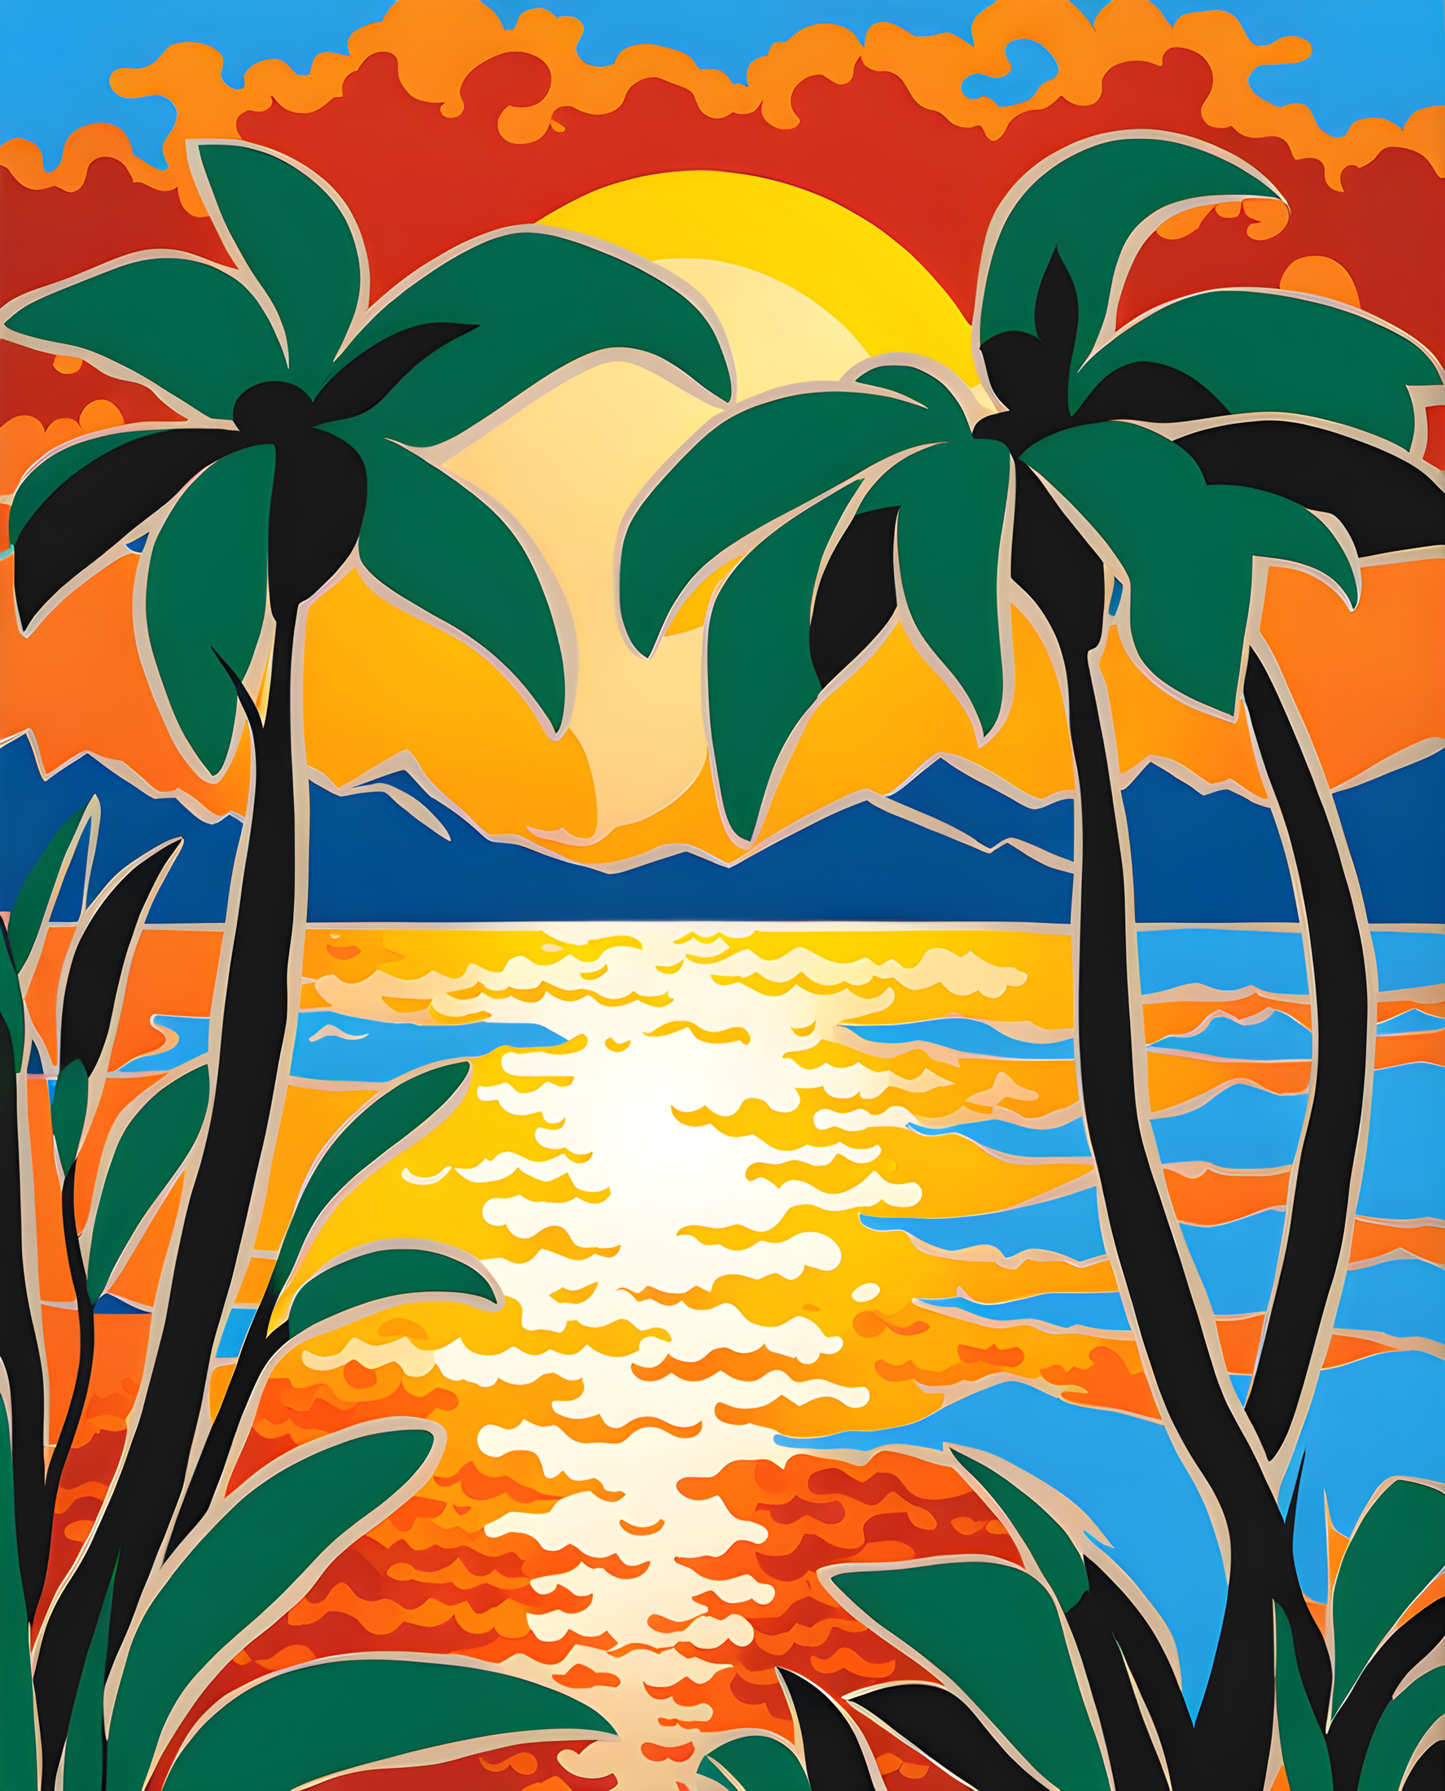 Tropical Sunset - Van-Go Paint-By-Number Kit